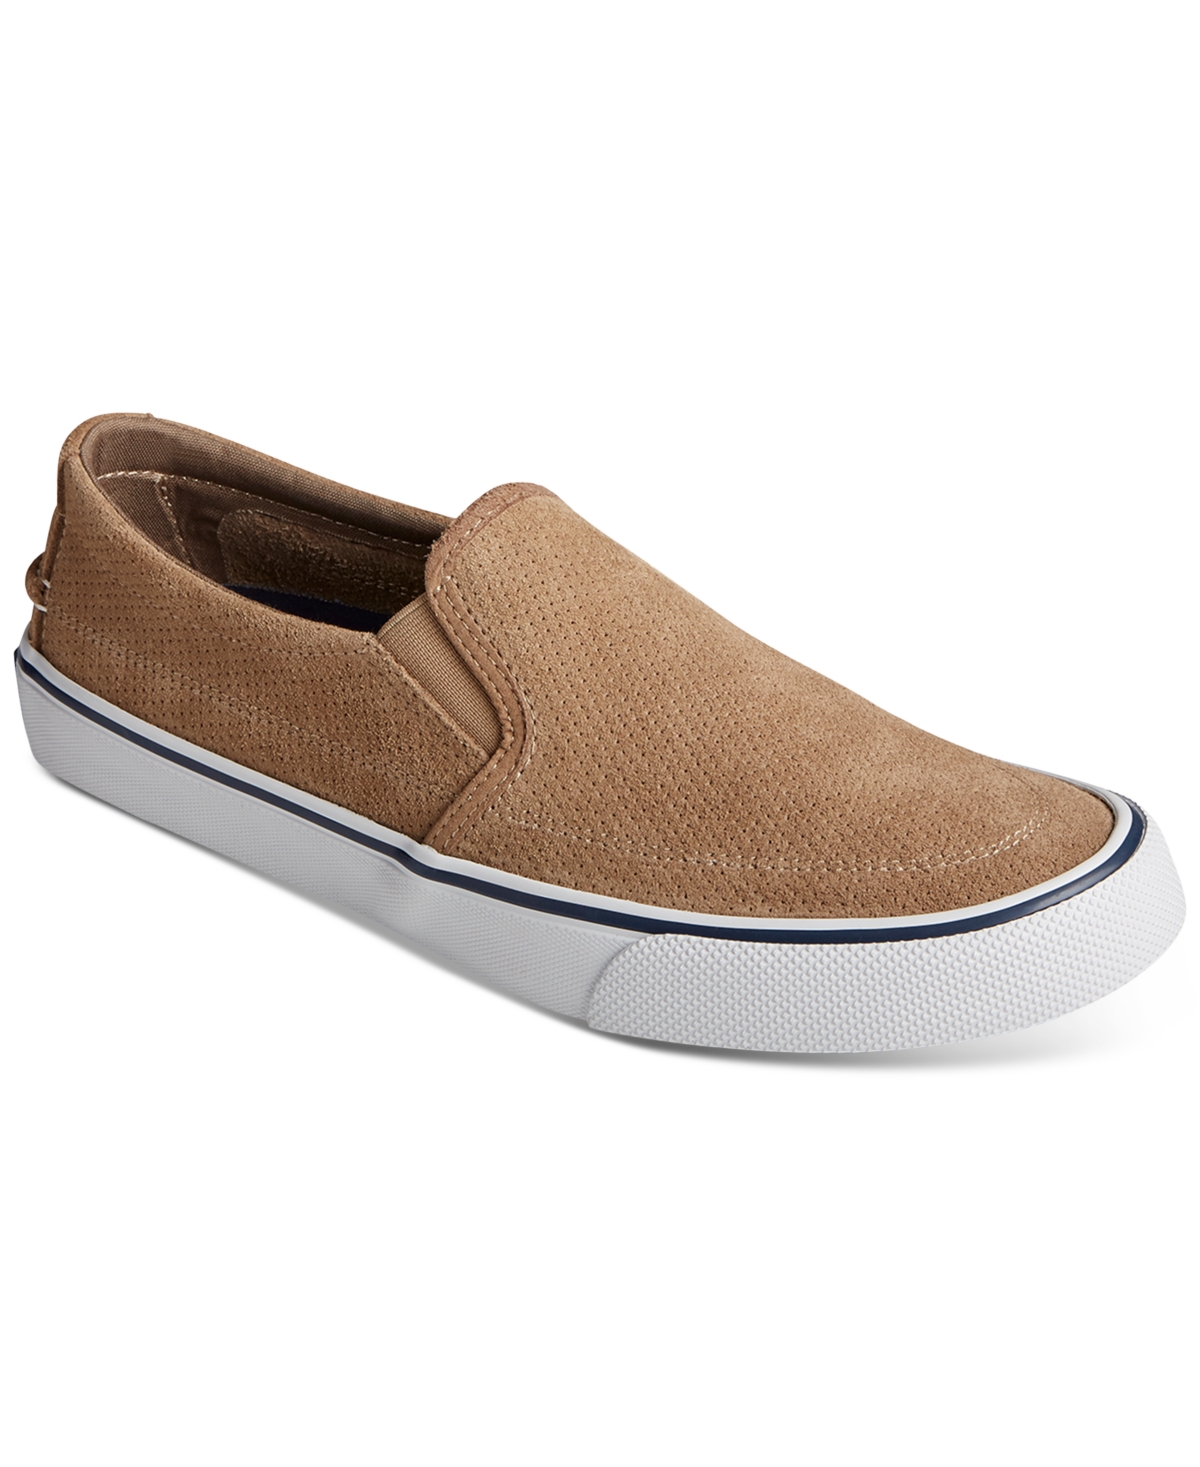 SPERRY MEN'S STRIPER II TWIN GORE PERFORATED SUEDE SLIP-ON SNEAKERS MEN'S SHOES